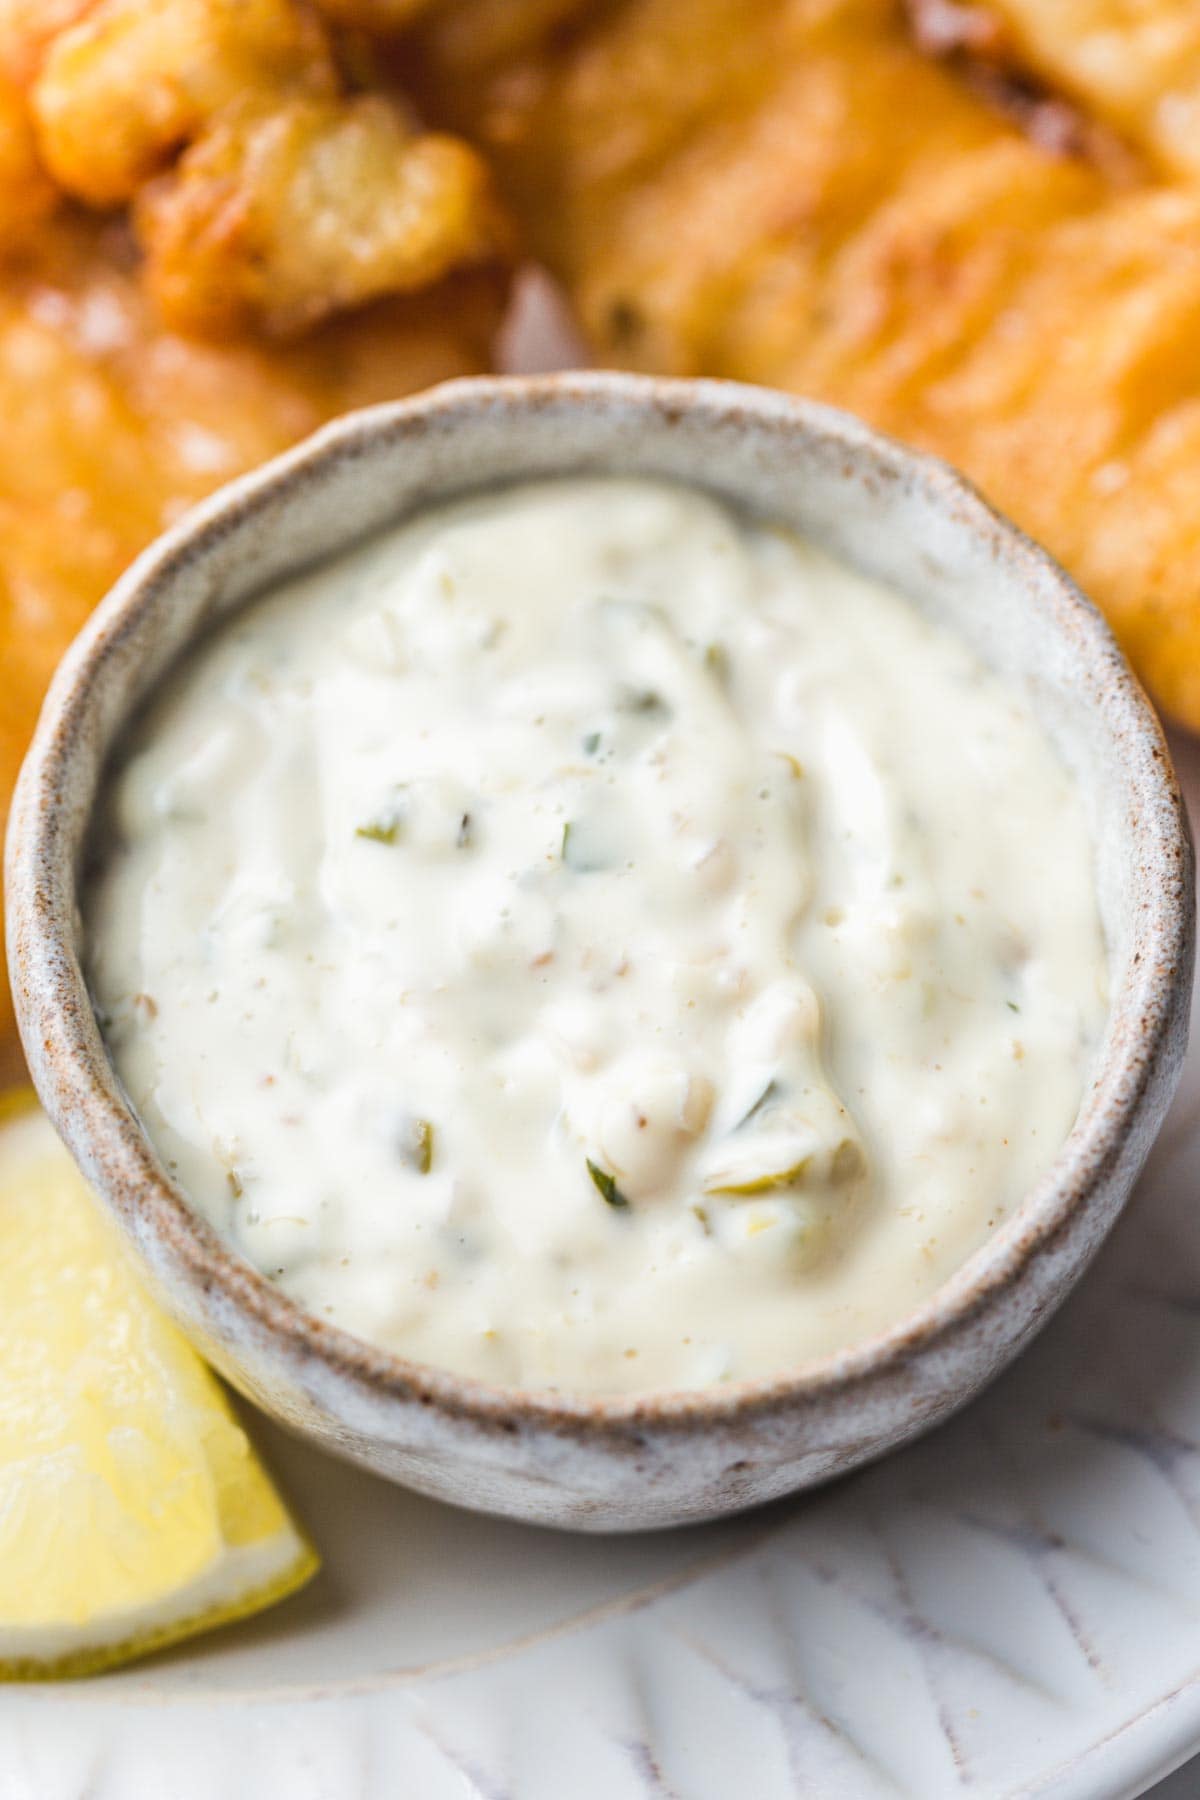 Tartar sauce in a small ceramic pinch bowl, and a lemon wedge on the side